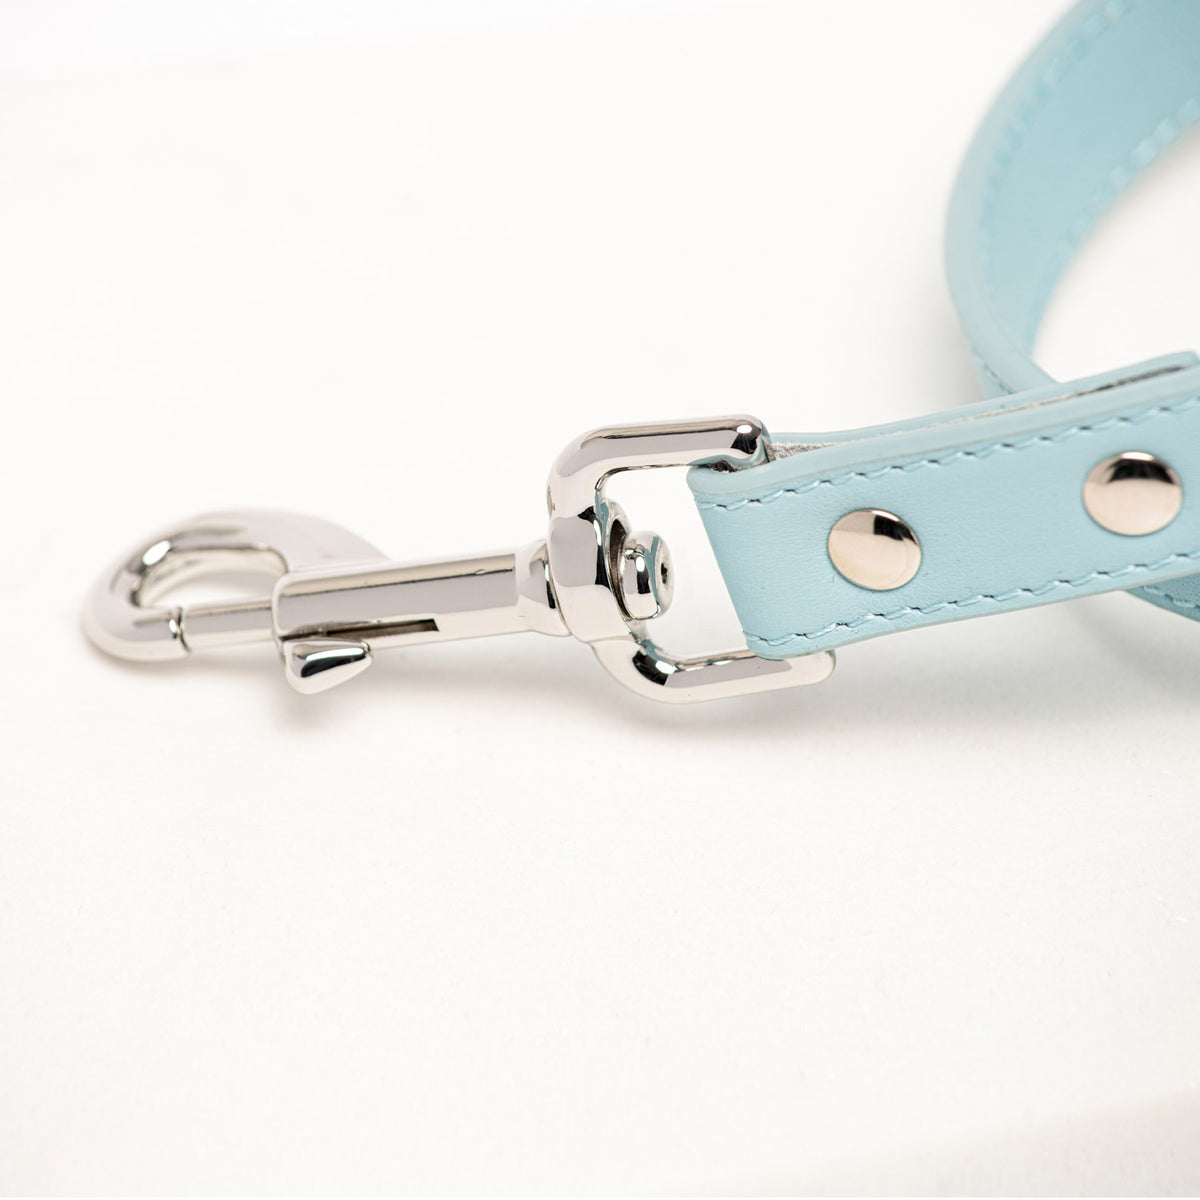 Rufus & Coco's Paris light blue leather dog lead is made from quality leather. Each lead is finished with premium silver hardware and studs for style and durability. Suitable for dogs of all sizes, this 100% light blue leather dog lead is 120cm long.